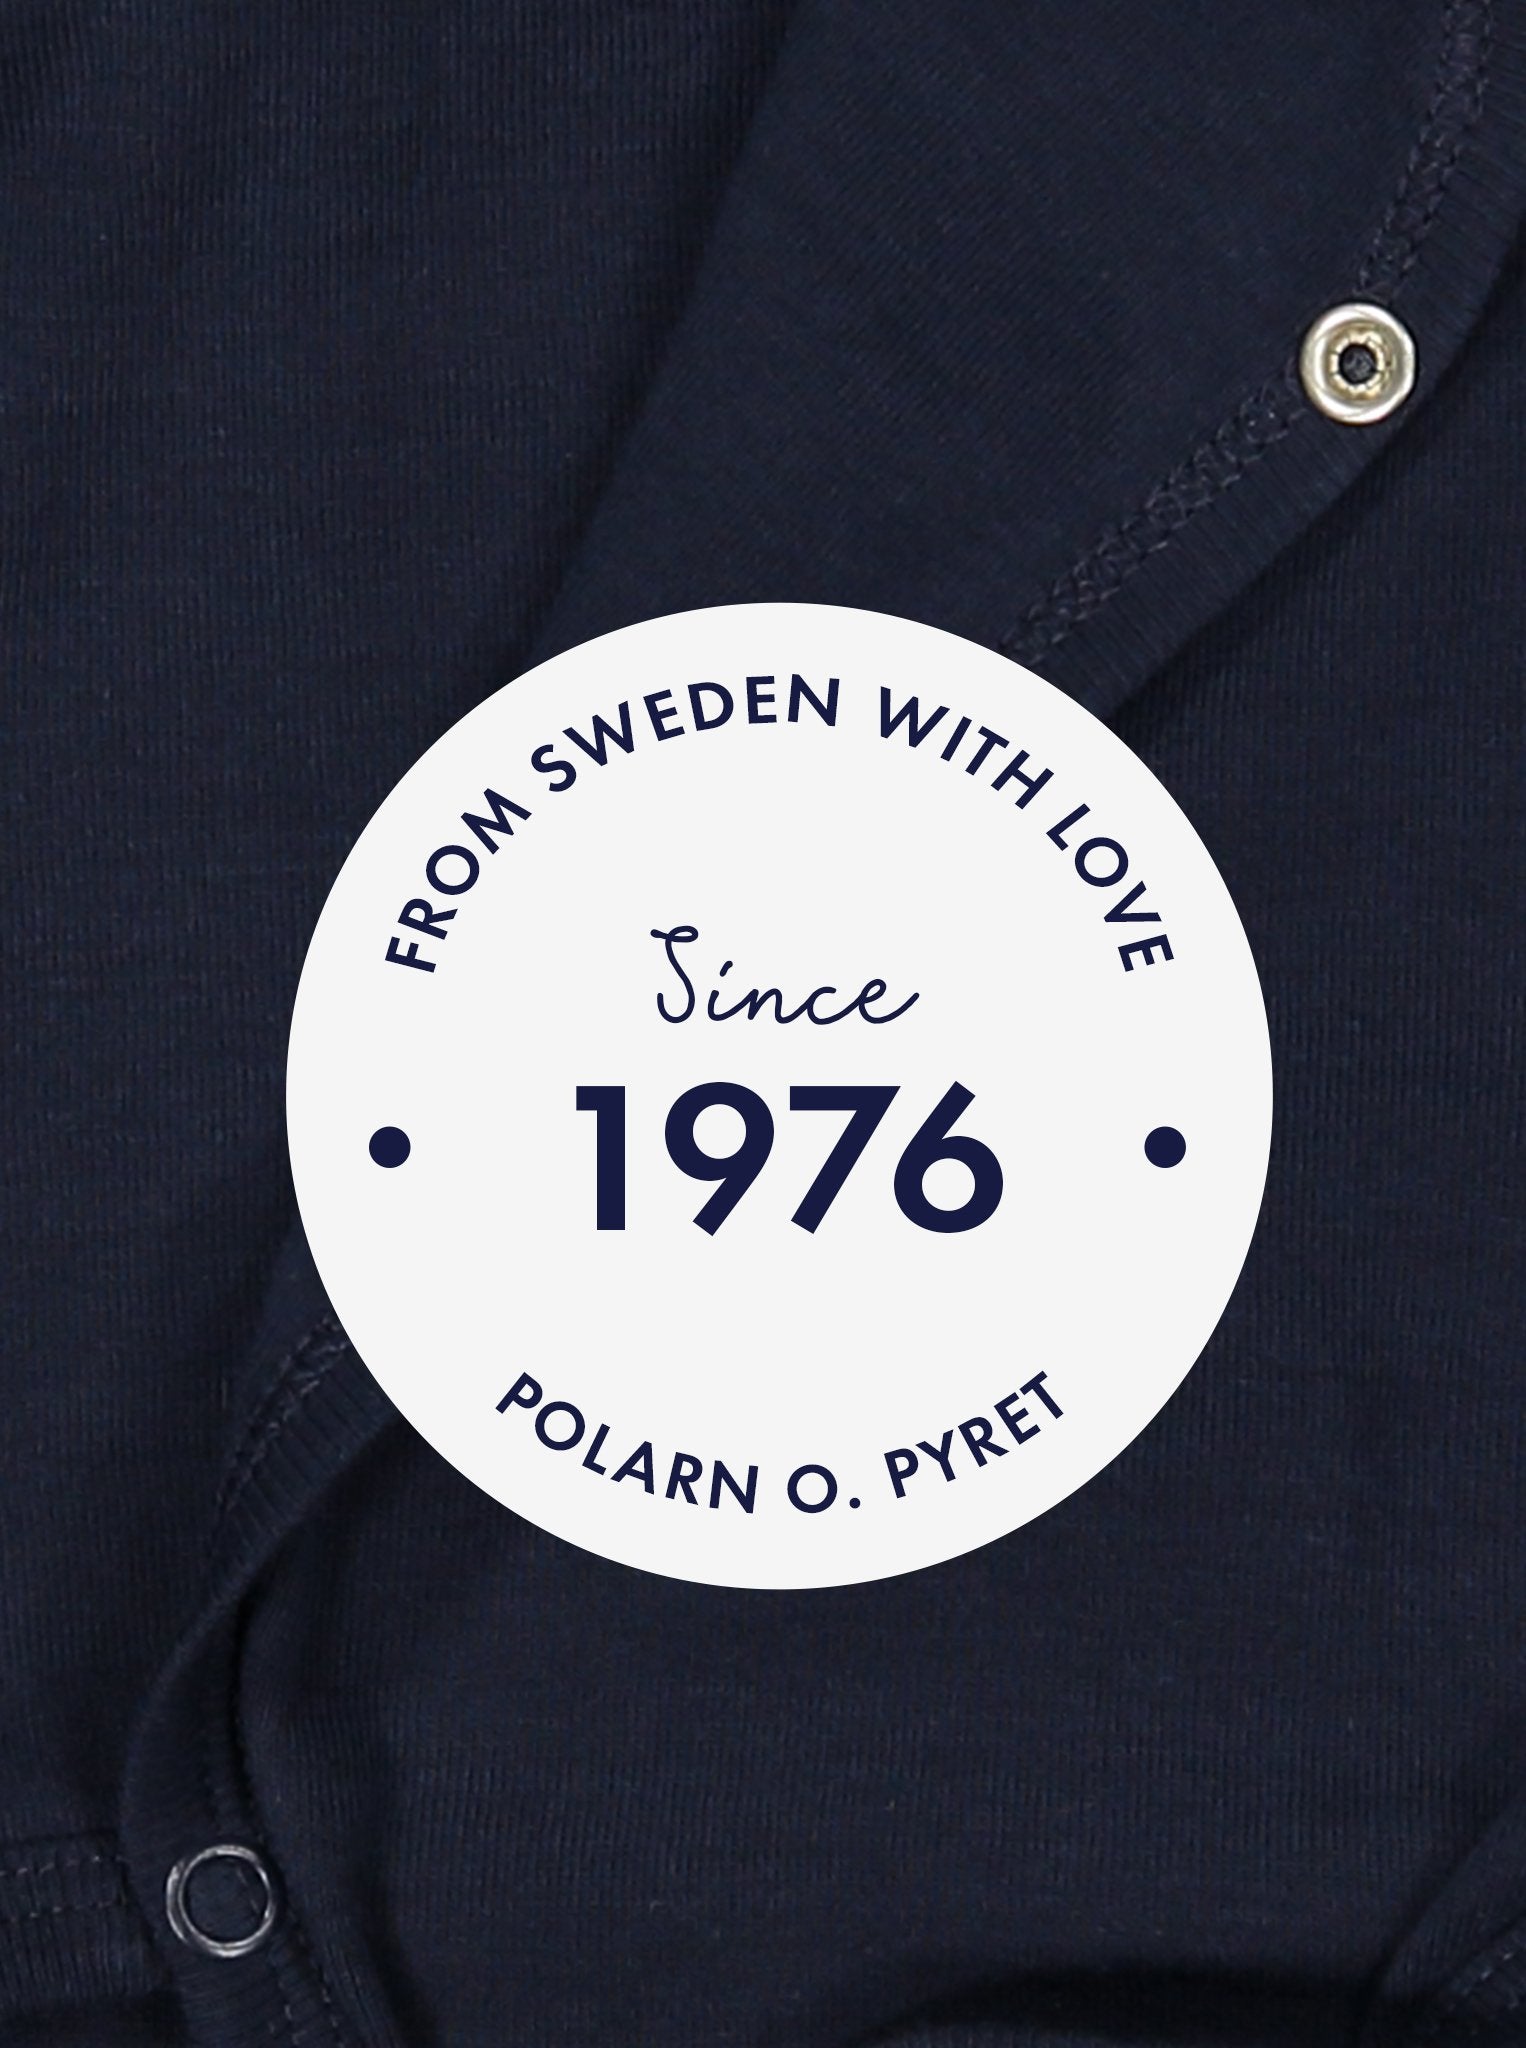 White round label with the text 'From Sweden With Love, Since 1976" shown in front of a navy blue babygrow background.